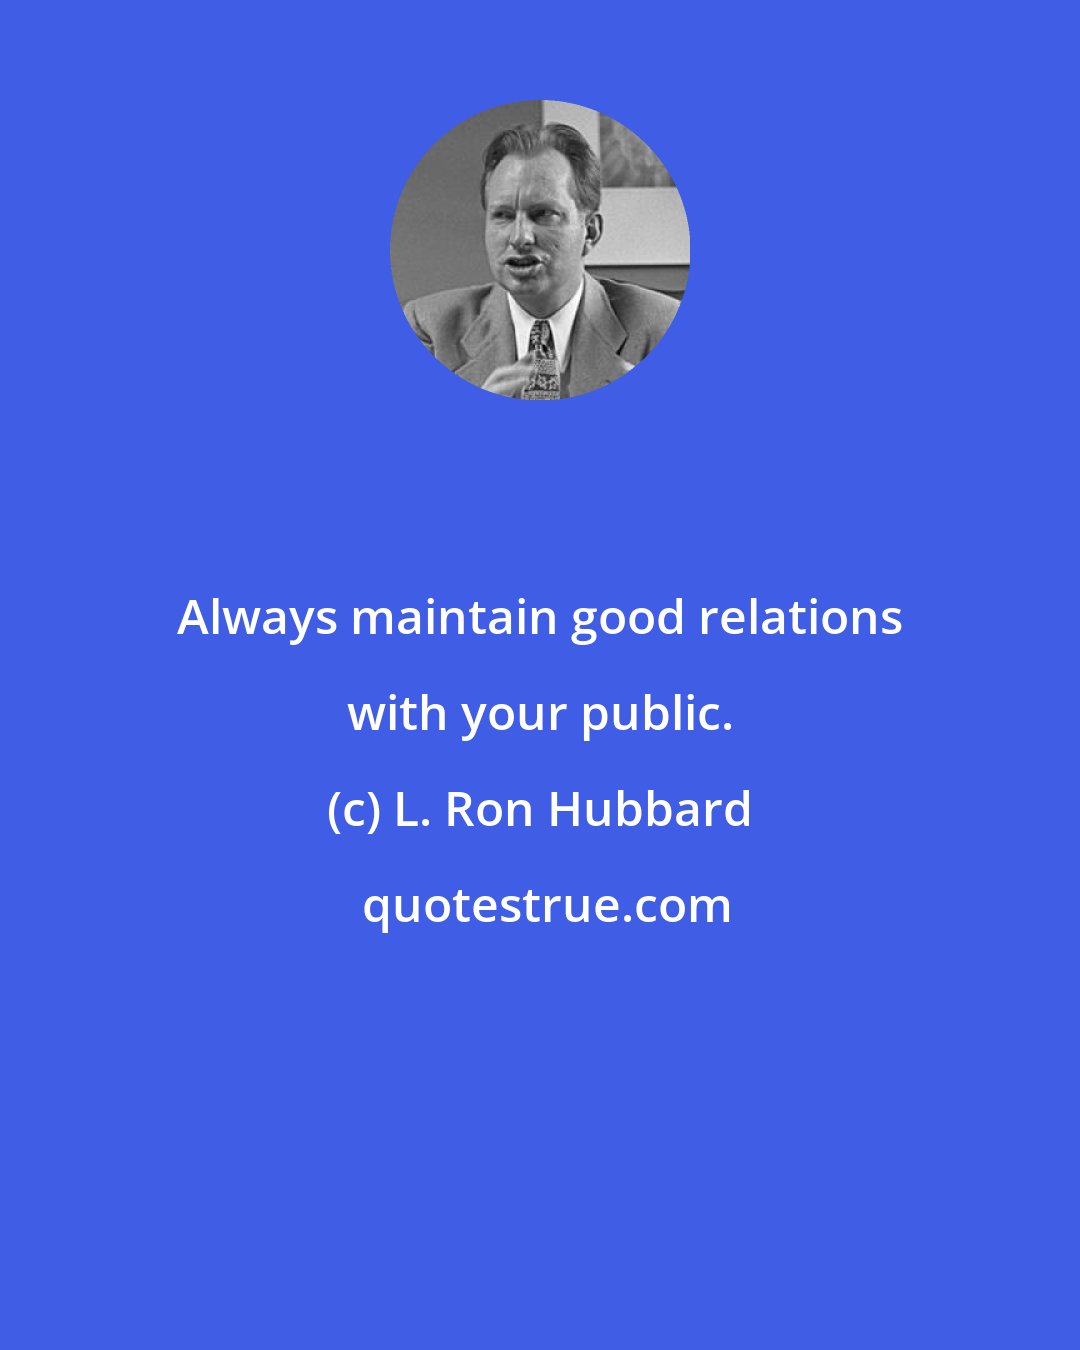 L. Ron Hubbard: Always maintain good relations with your public.